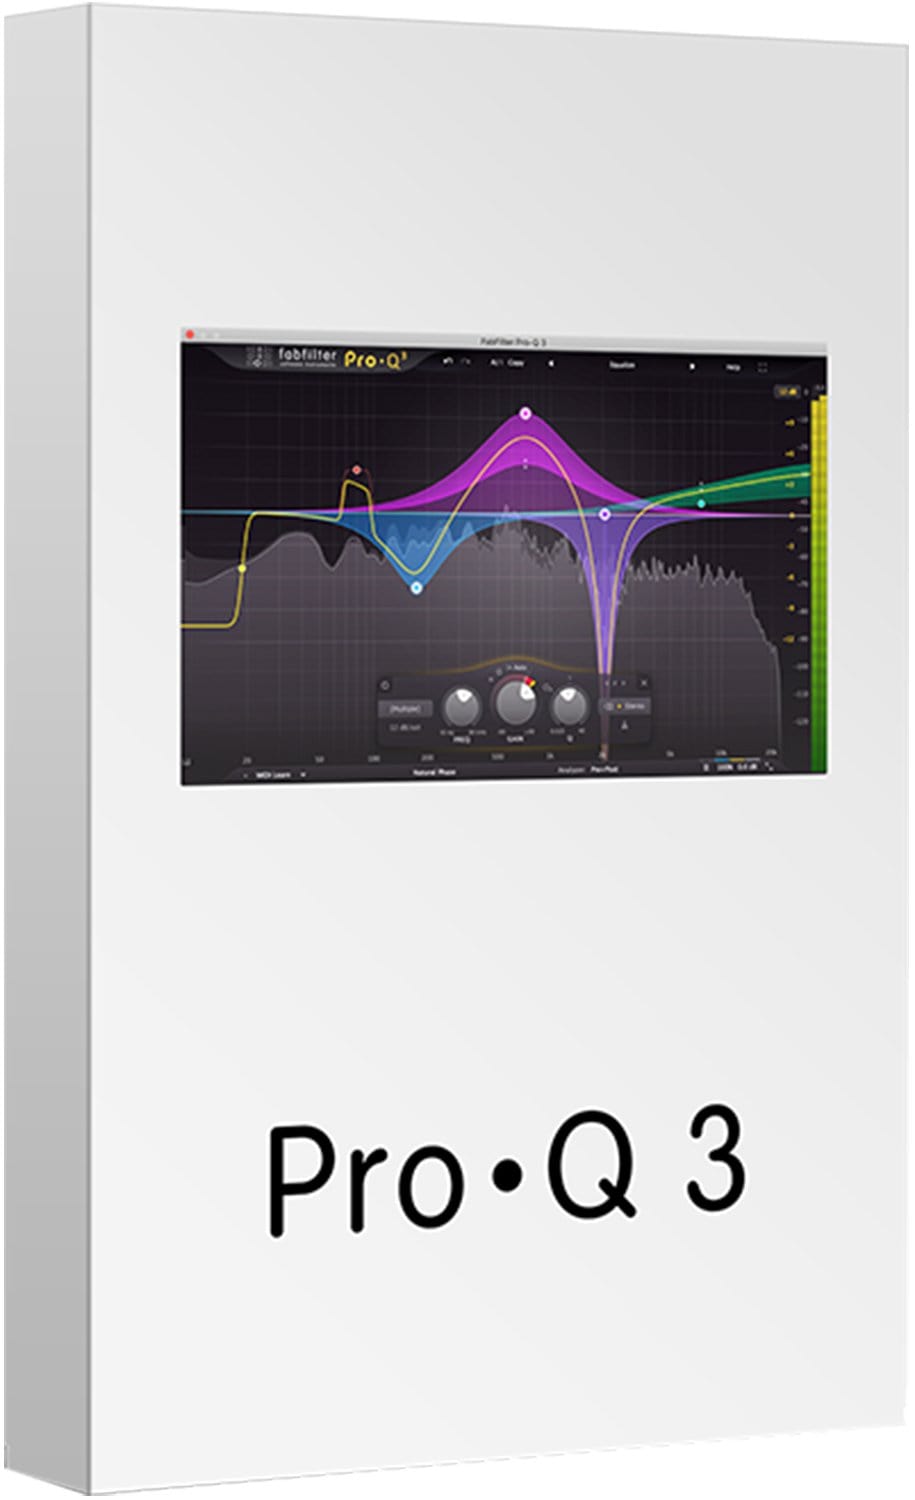 Fabfilter Pro-Q 3 Upgrade - ProSound and Stage Lighting